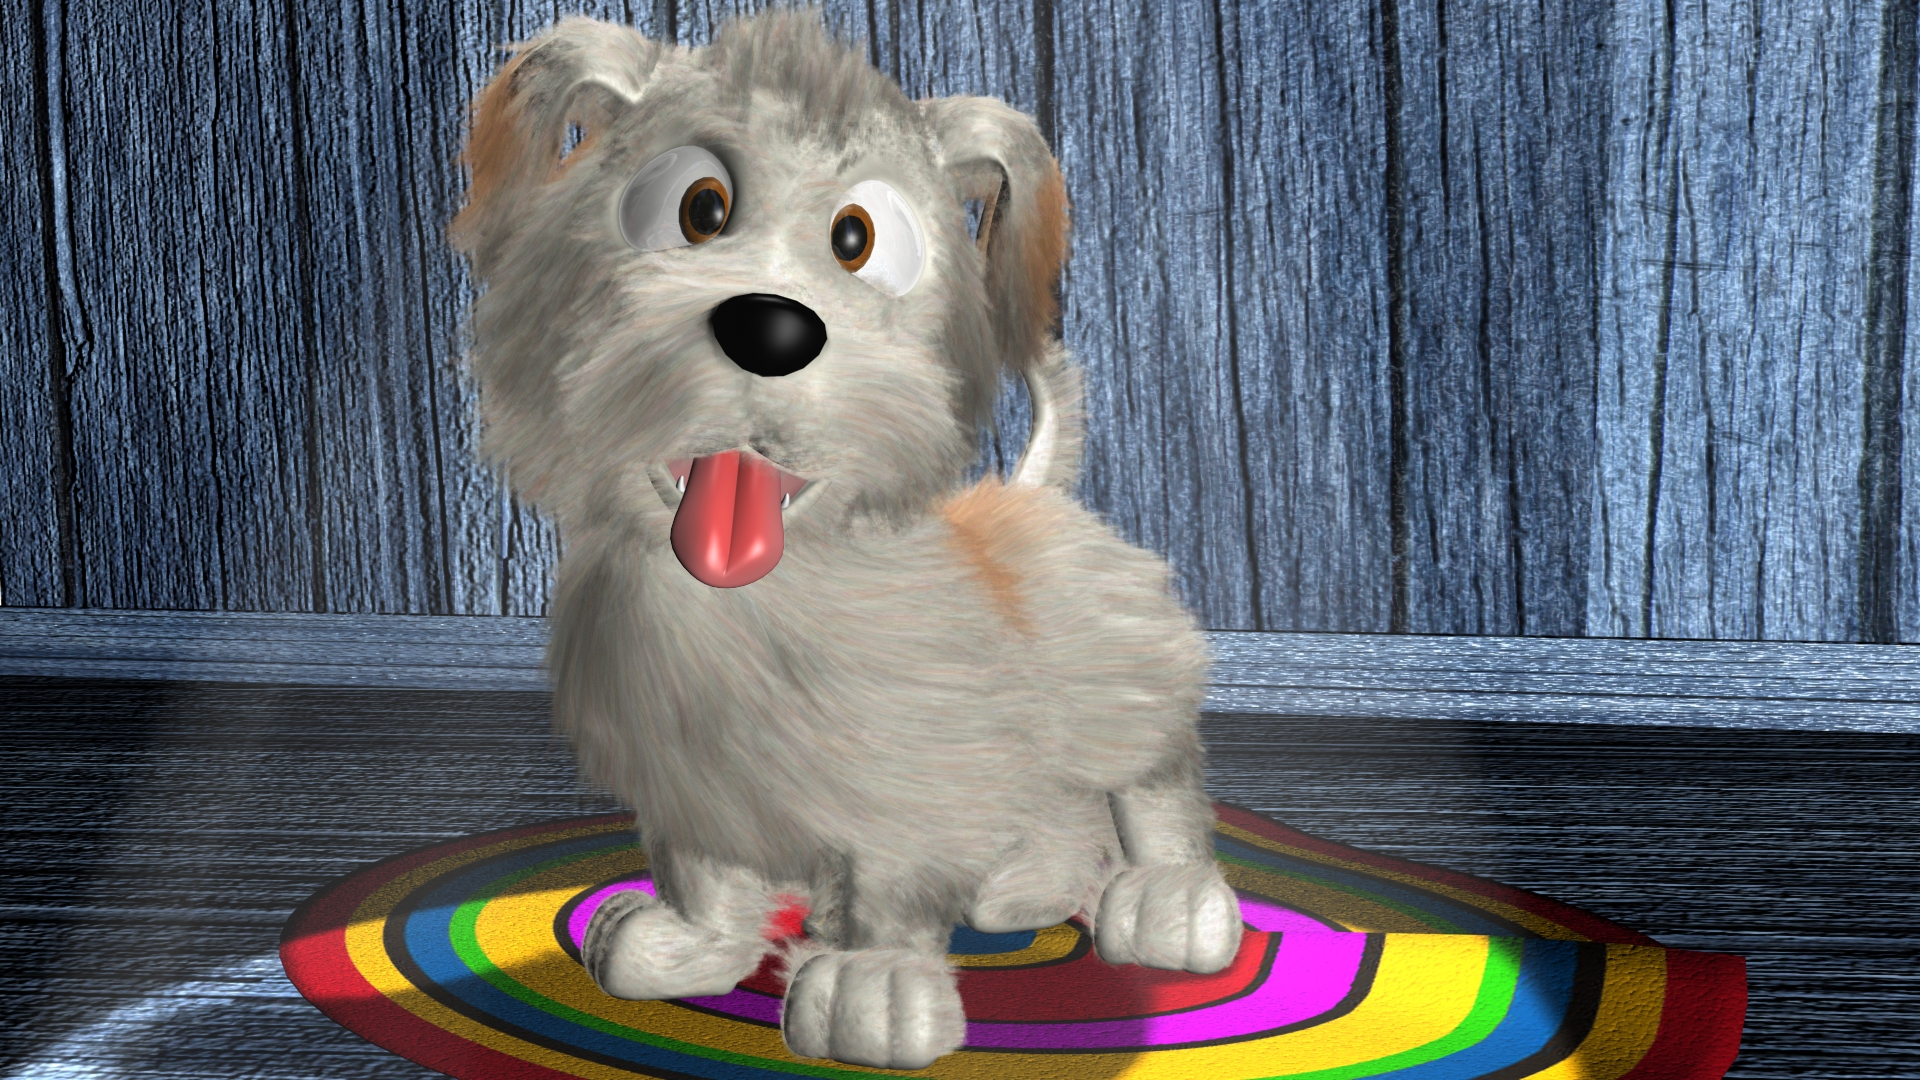 Cartoon Dog Full HD Wallpaper and Background Image | 1920x1080 | ID:559977